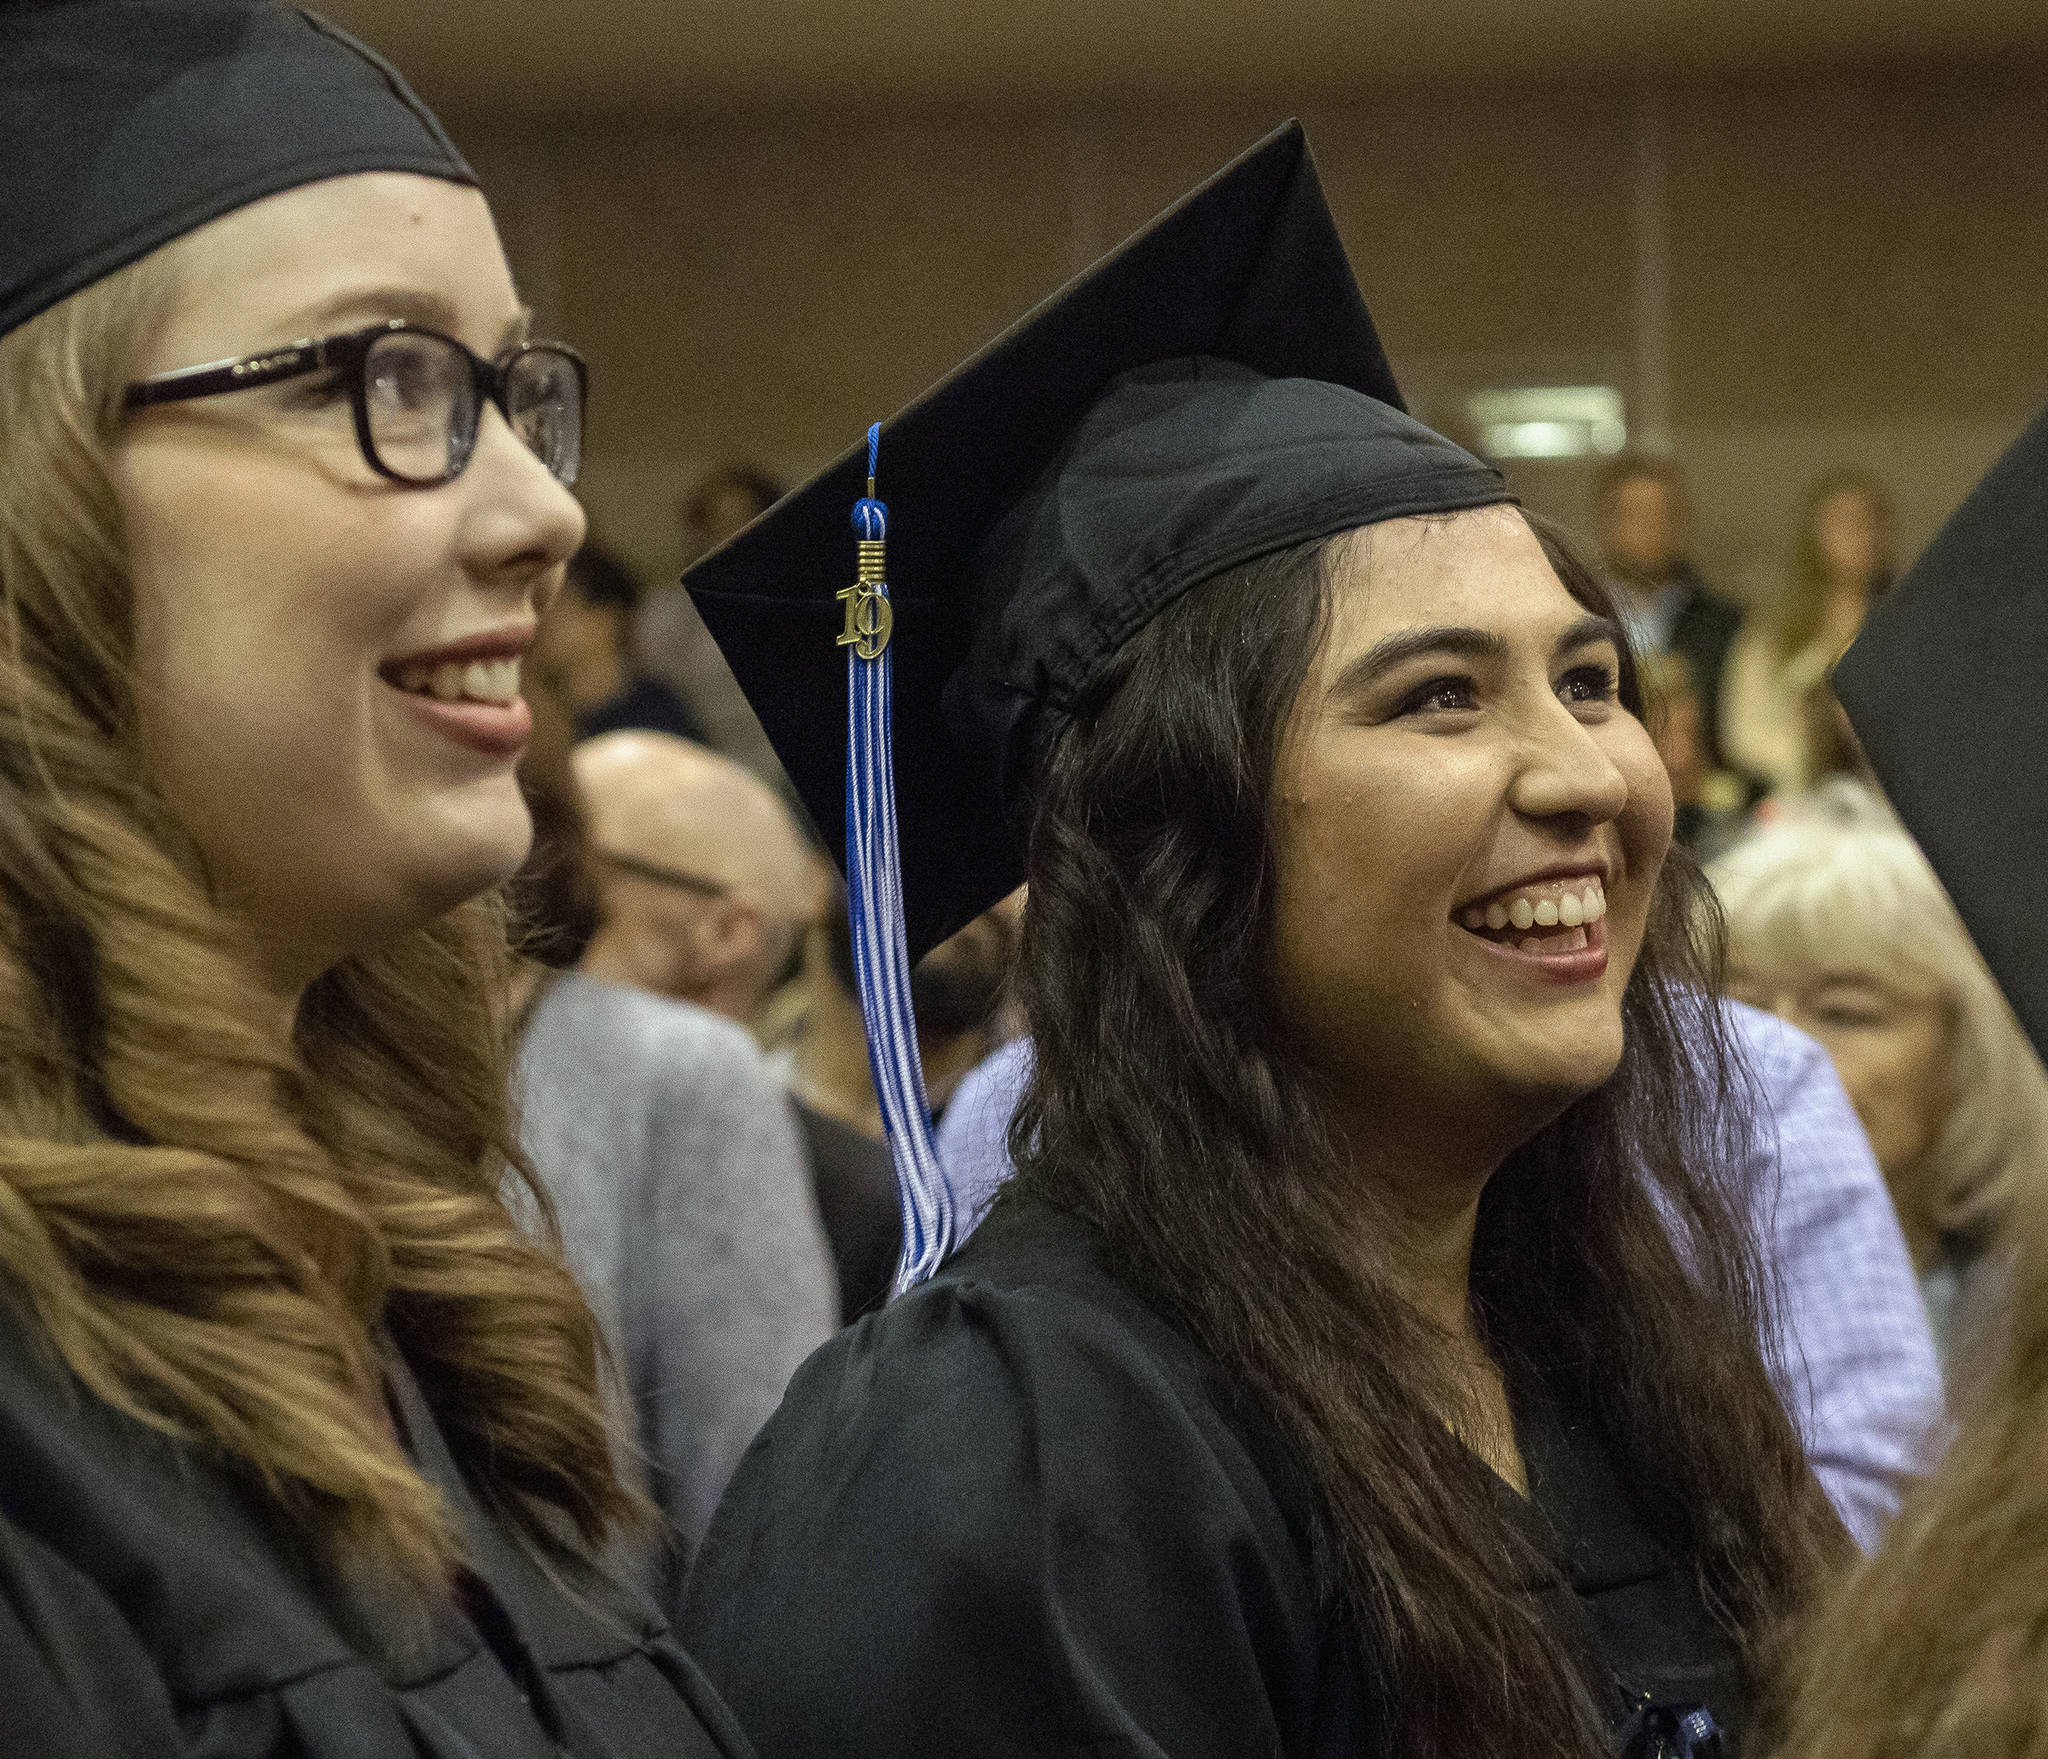 Anna Christina Tafoya, right, graduated with a Bachelor of Science degree in Marine Biology at the University of Alaska Southeast commencement ceremony on Sunday, May 5, 2019. (Erin Laughlin | For the Juneau Empire)